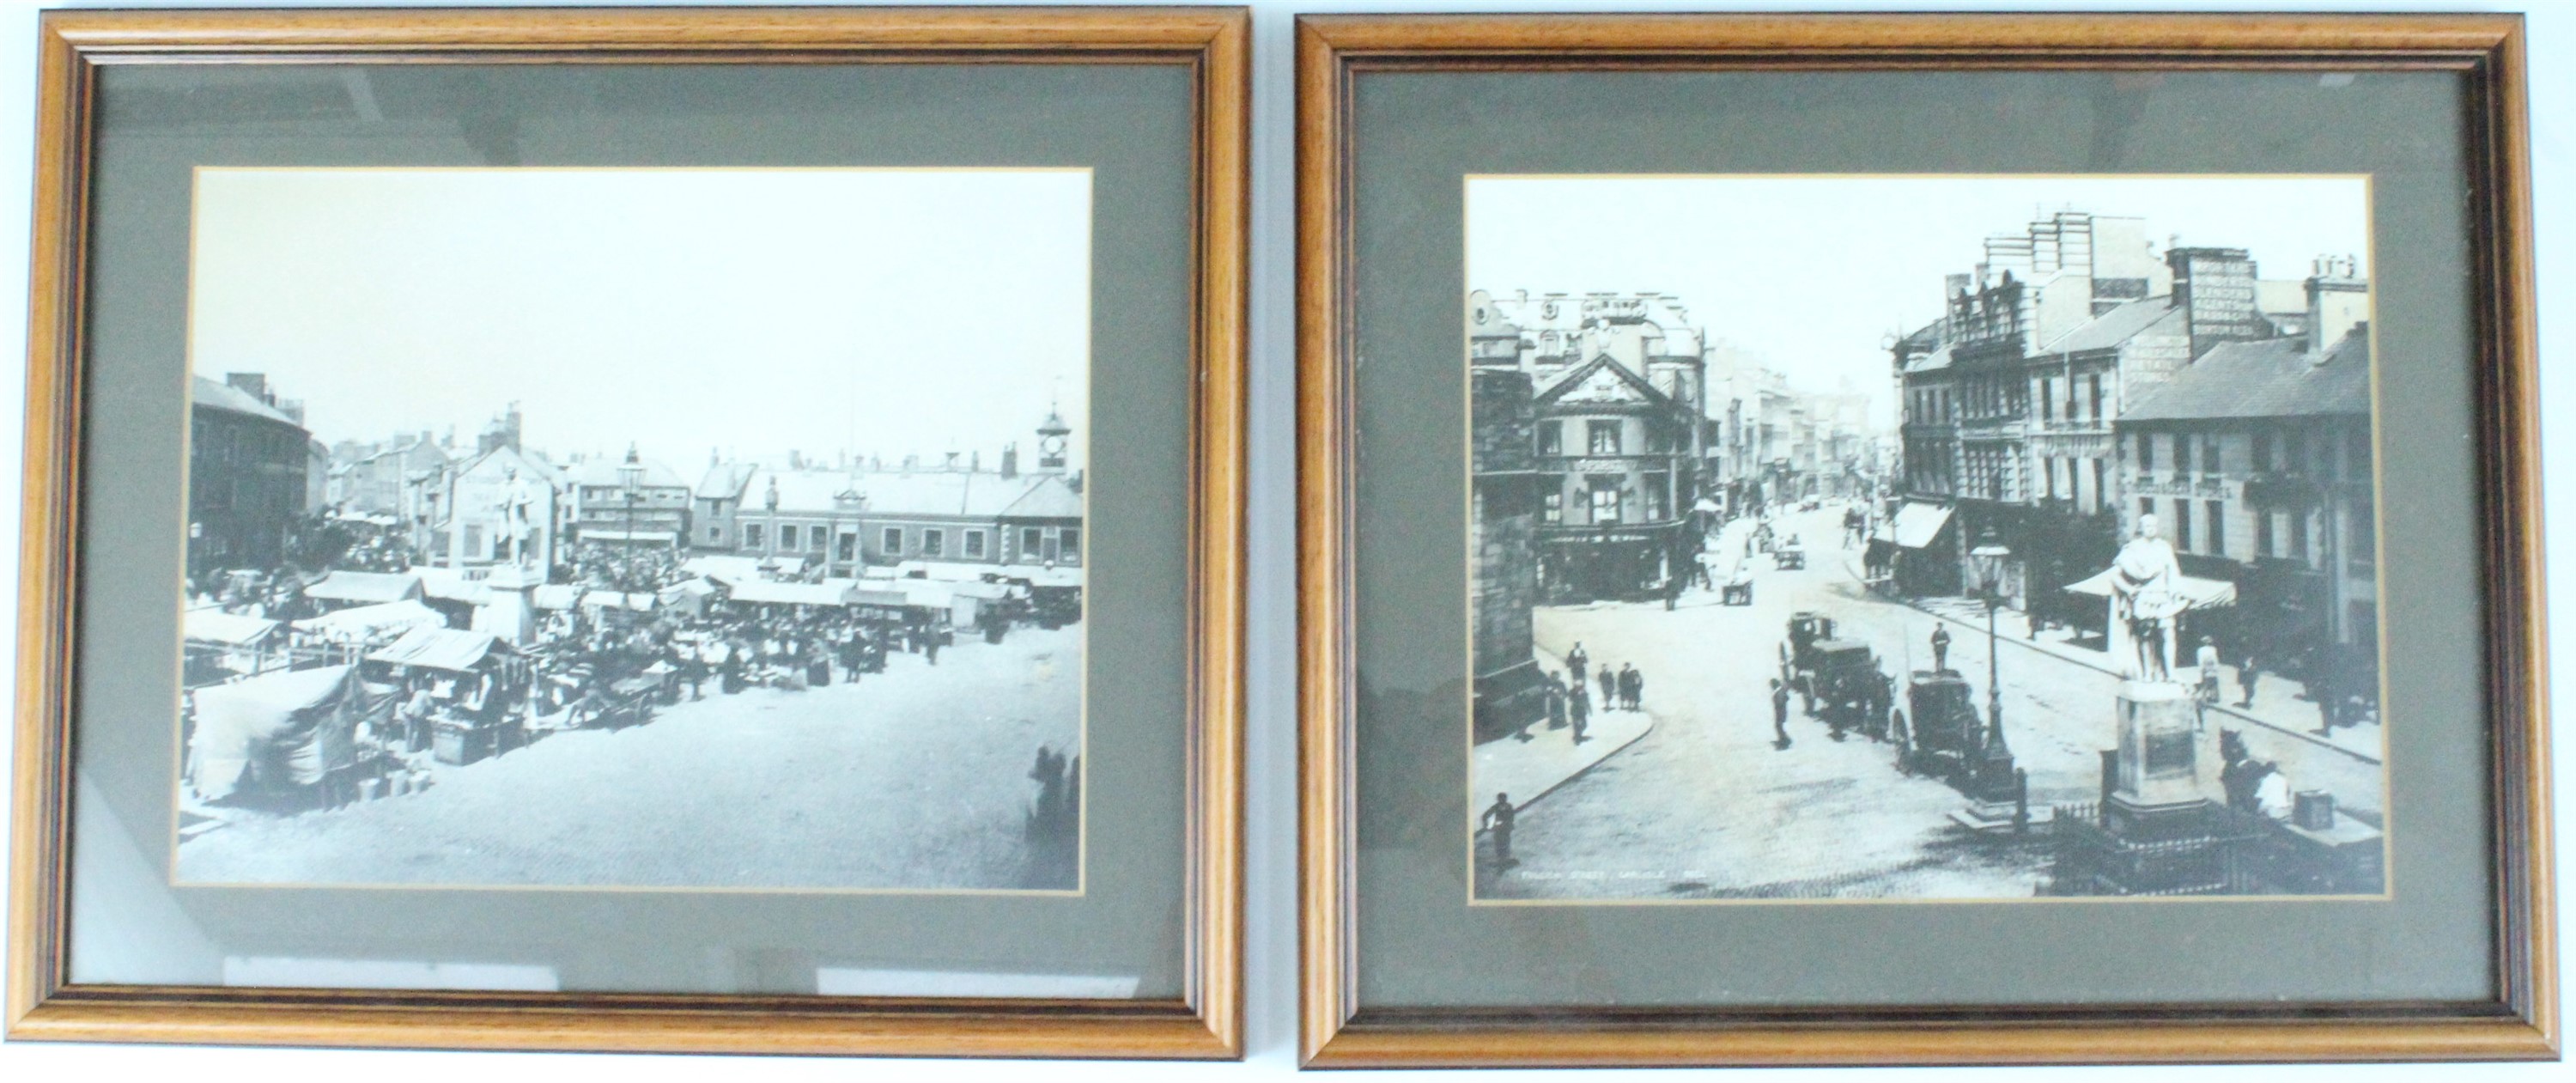 A uniformly framed pair of photographs of old Carlisle, from the selling exhibition by that name